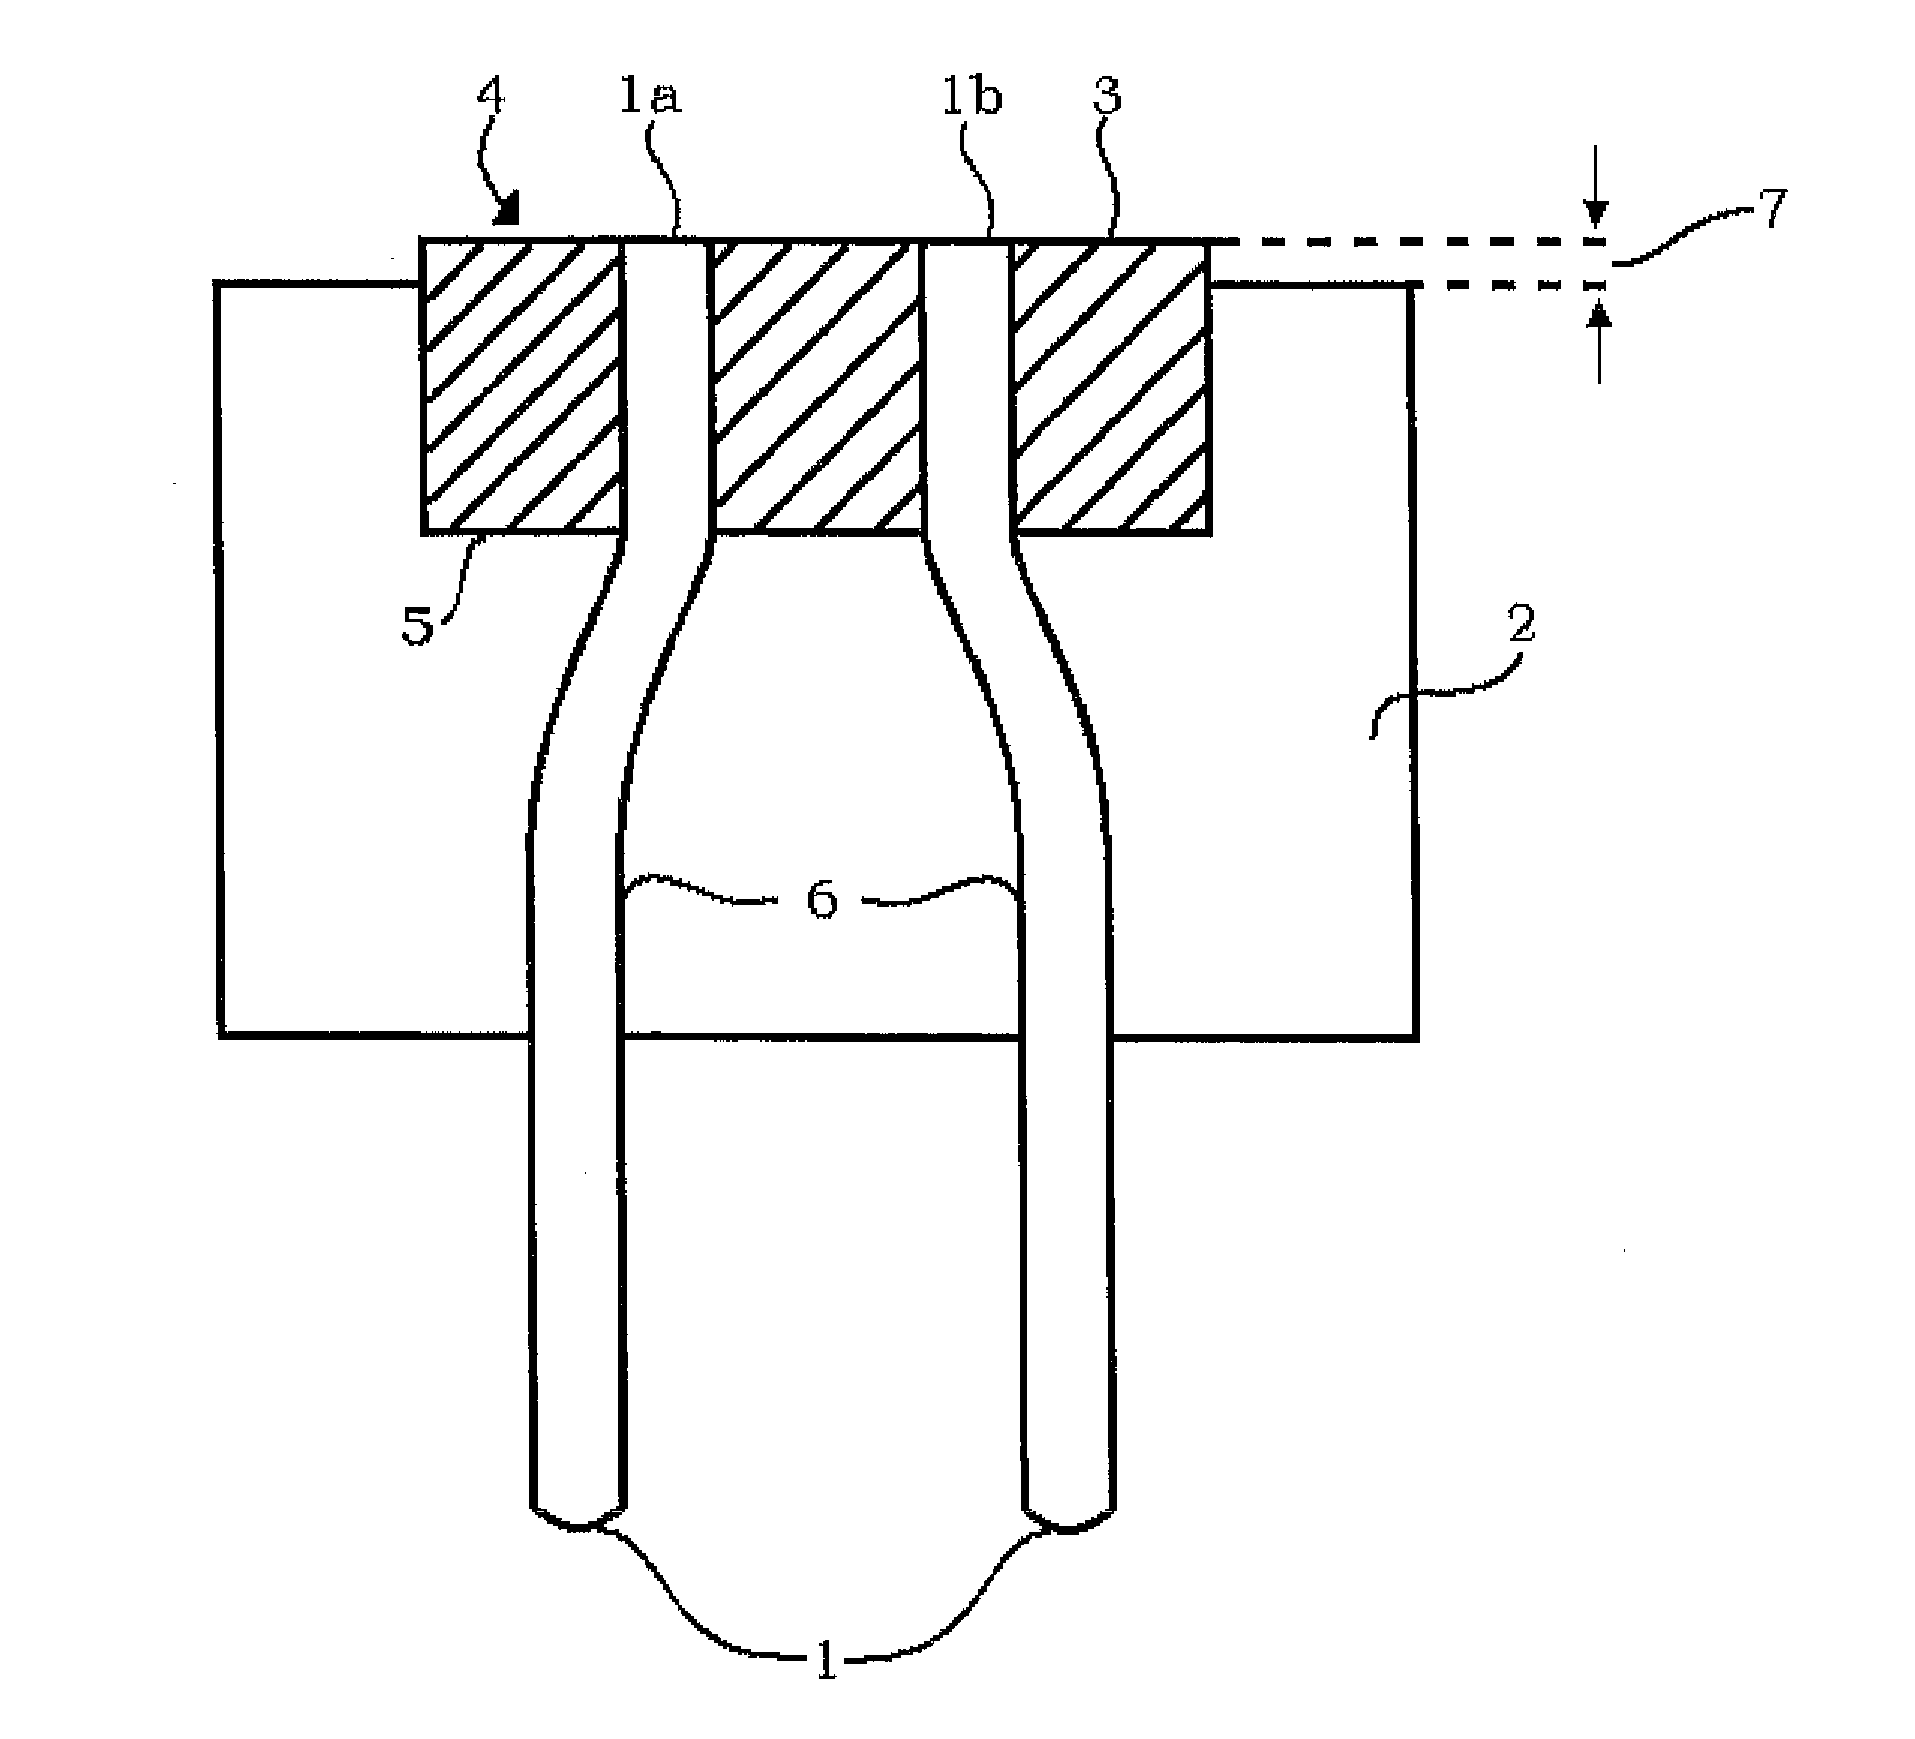 Igniter base for pyrotechnic devices